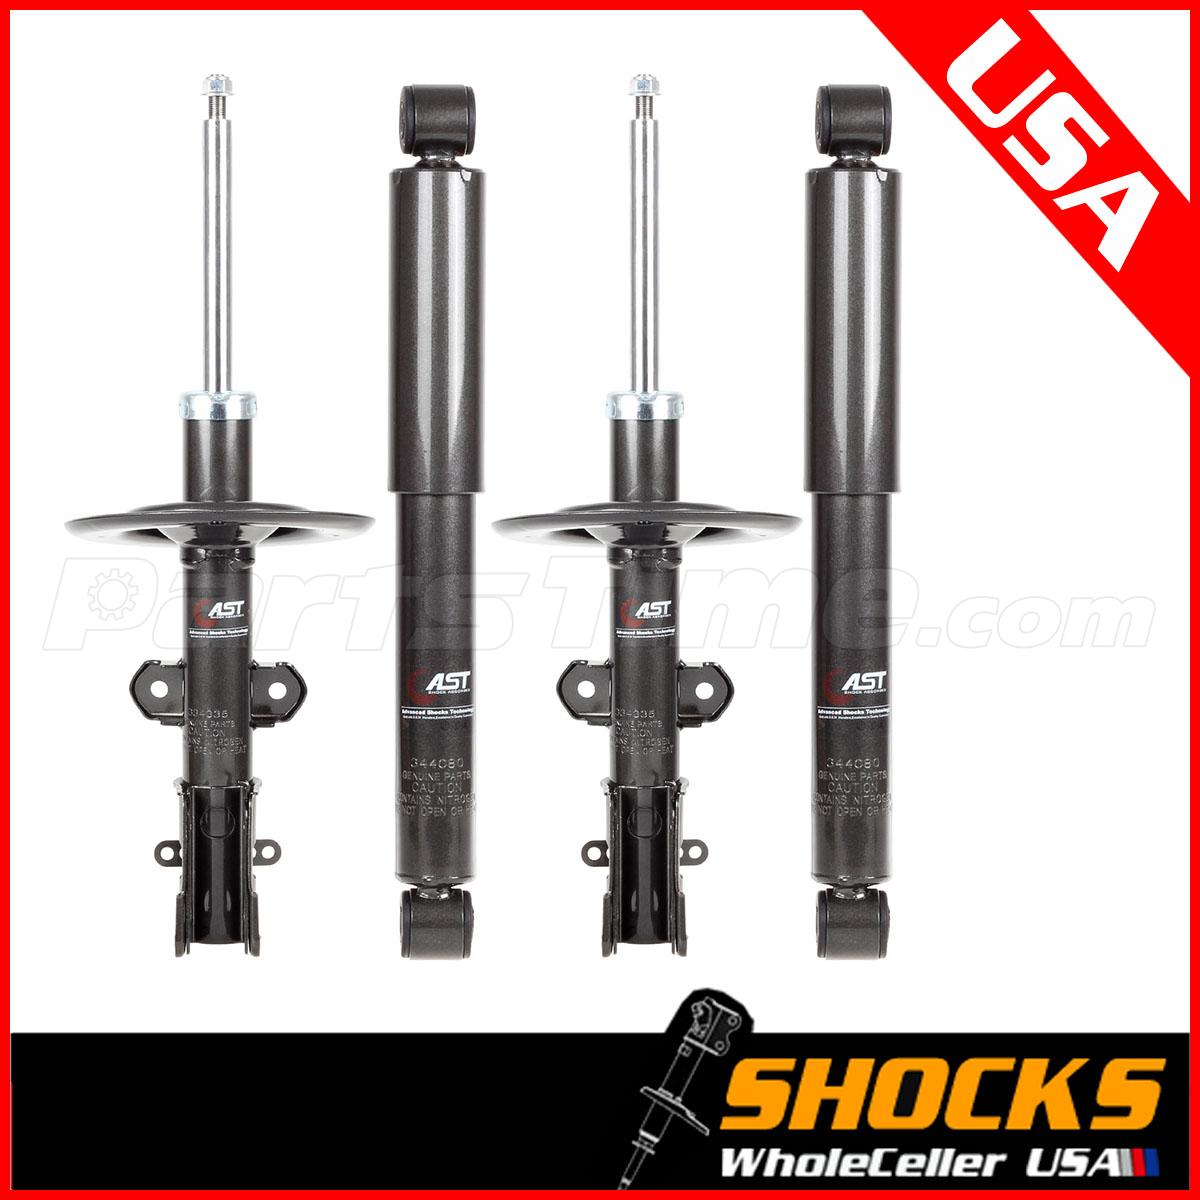 2003 Chrysler town and country shocks